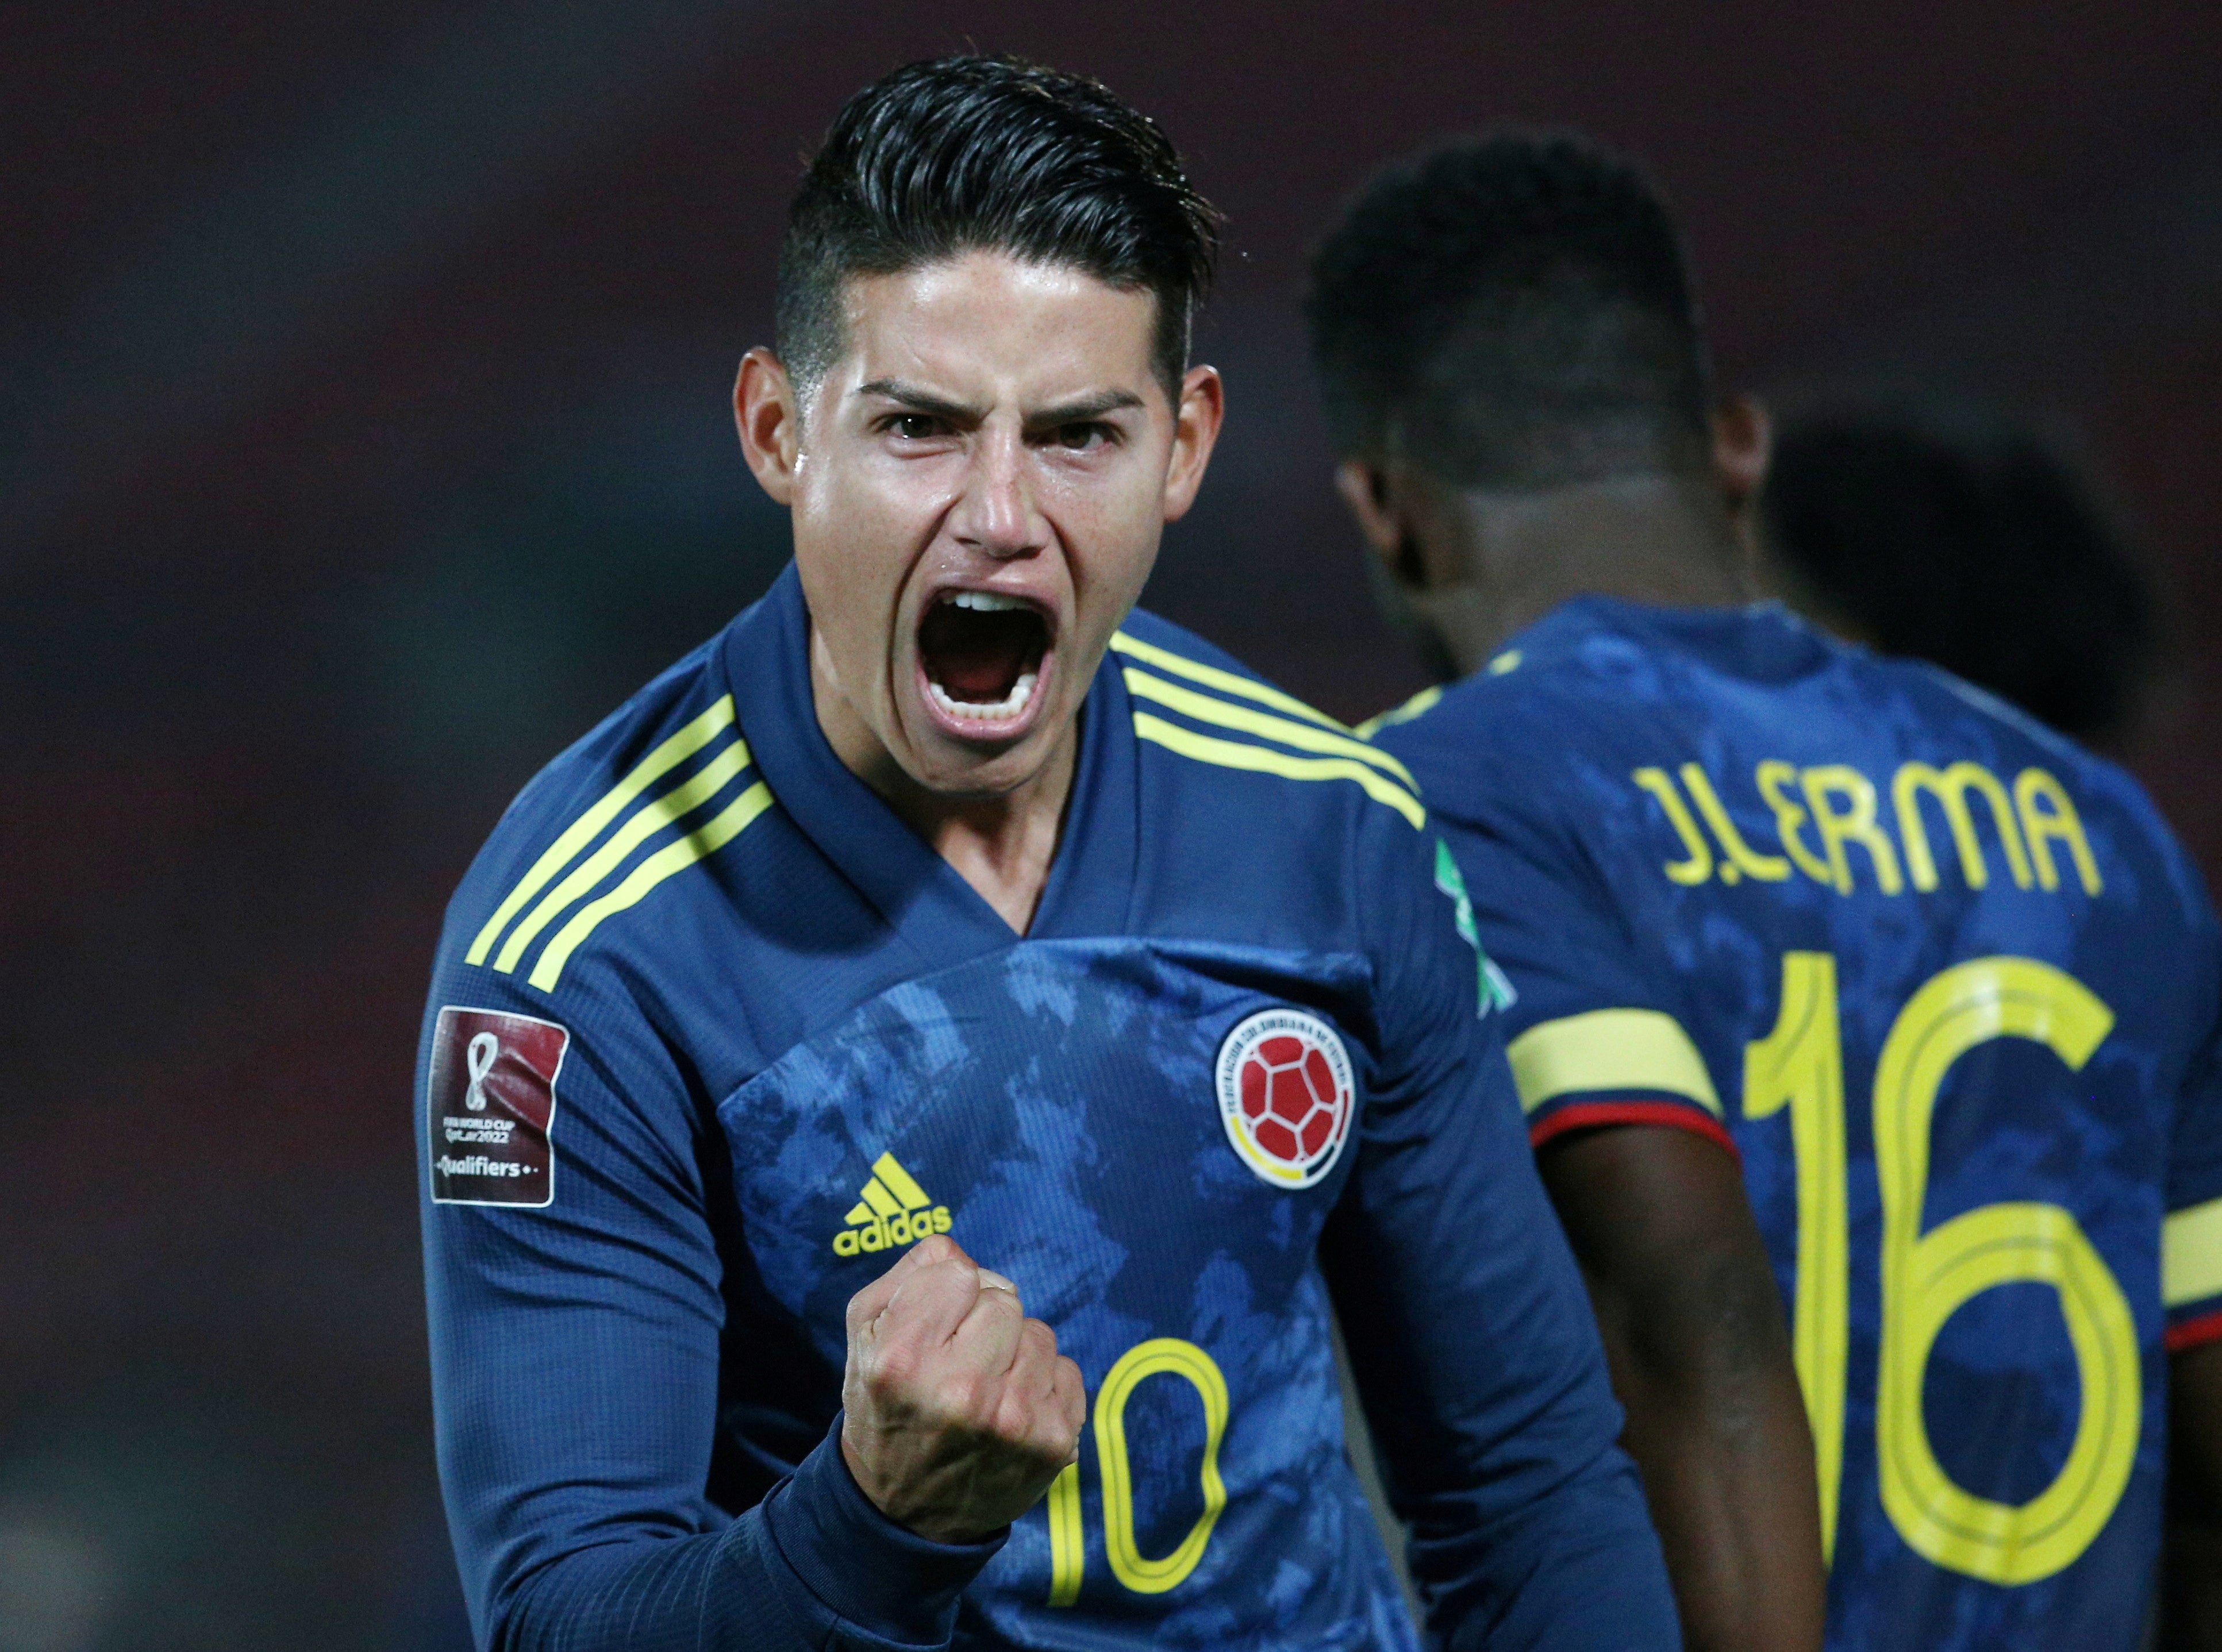 James Rodriguez remains an idol back home in Colombia despite his struggles